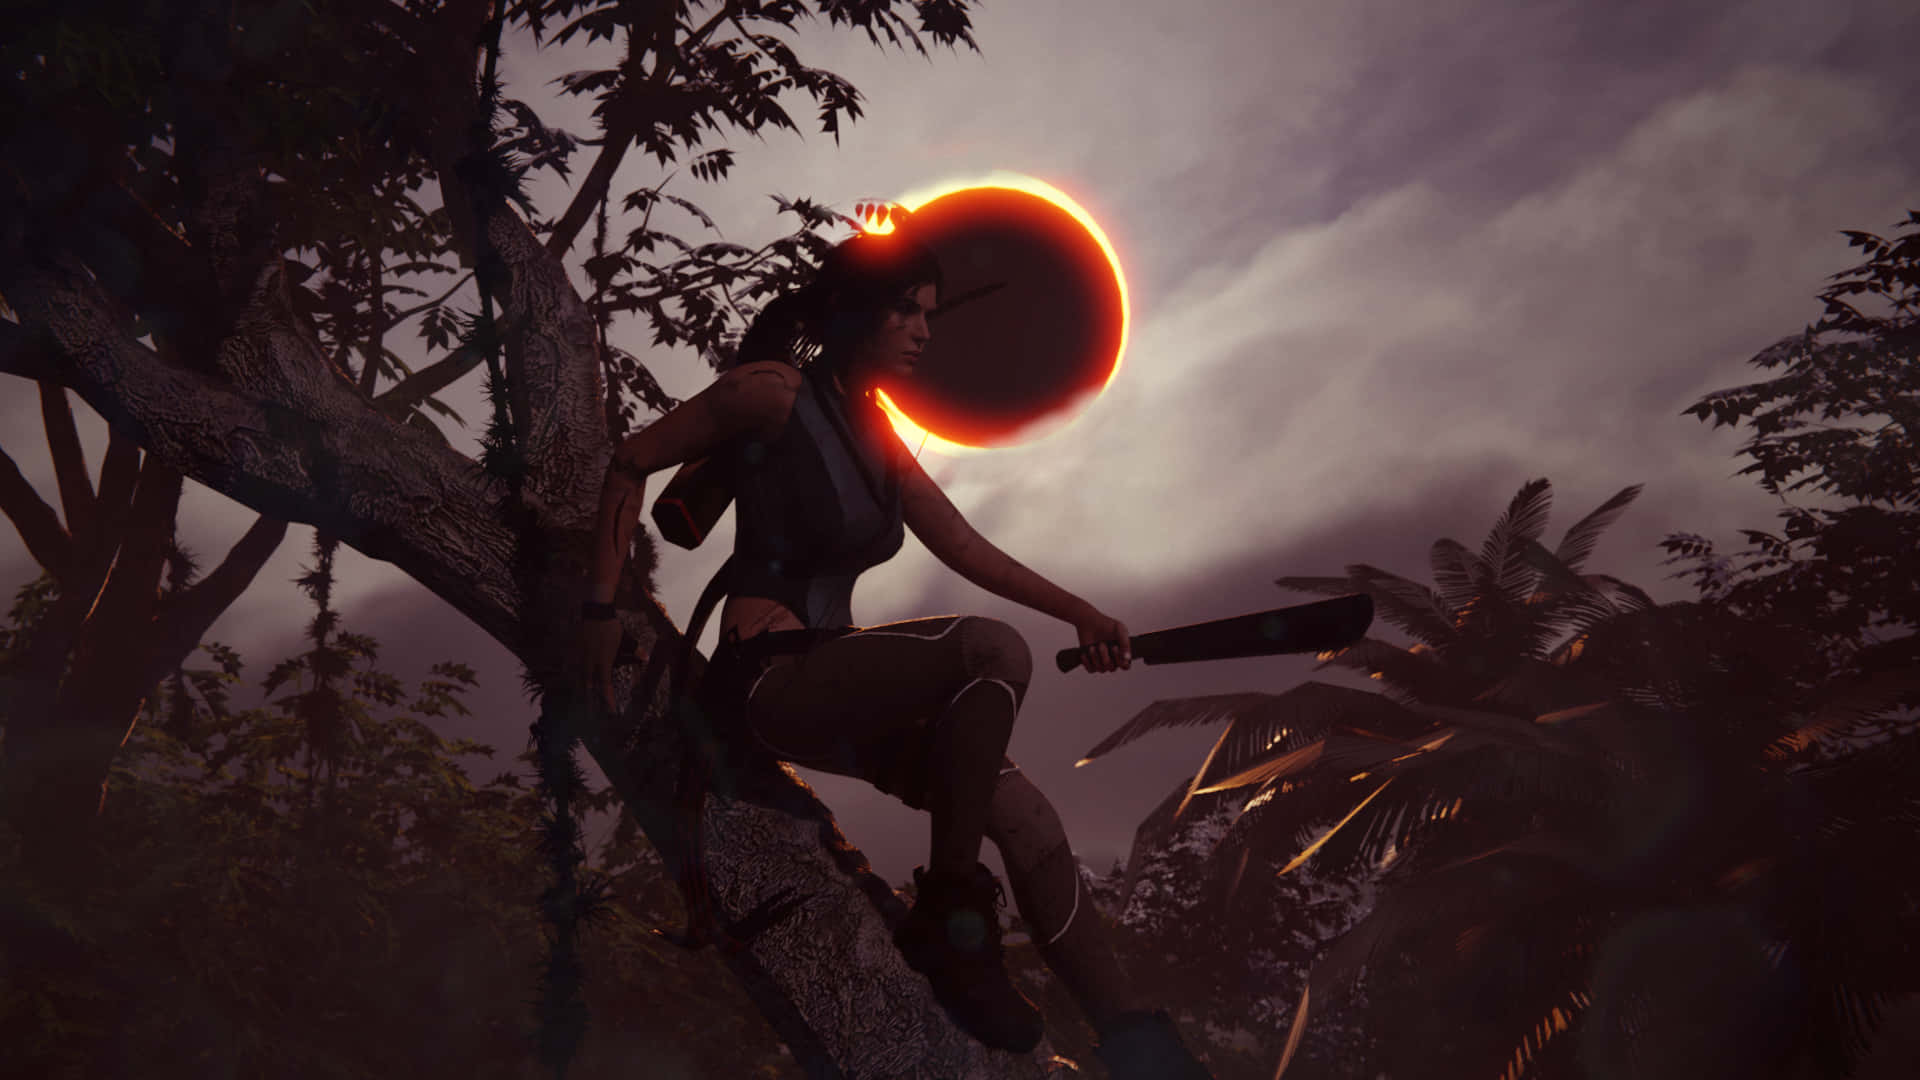 Admire the Shadow of the Mysterious Tomb Raider Wallpaper